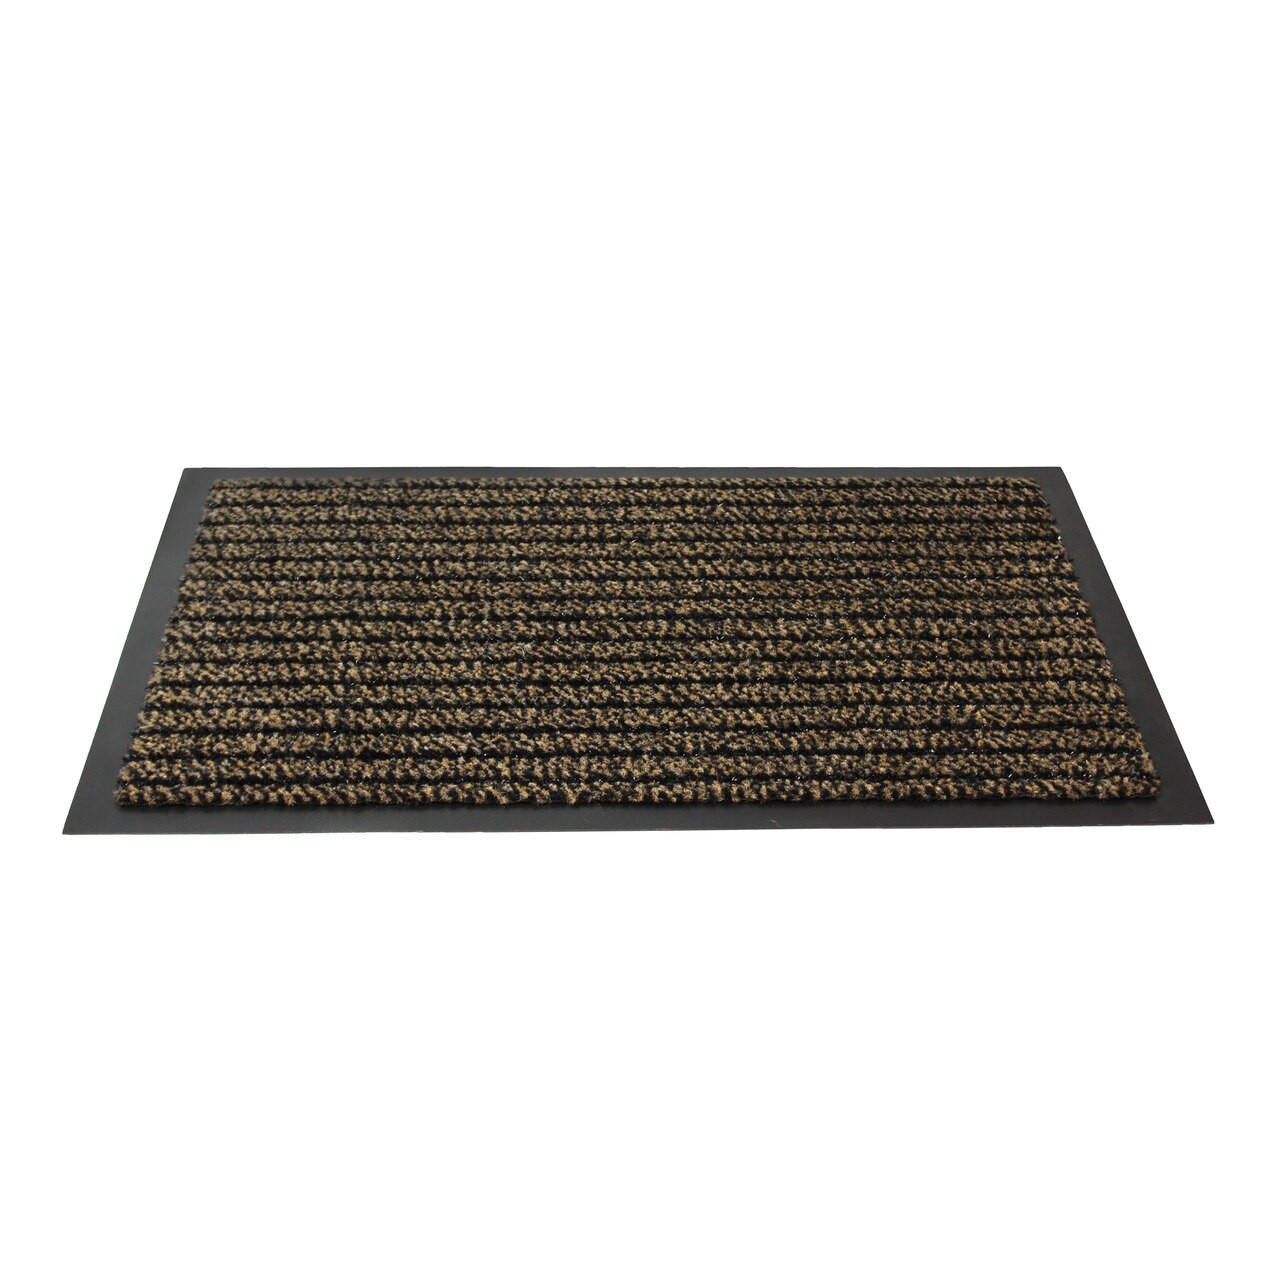 https://cdn11.bigcommerce.com/s-fjwps1jbkv/images/stencil/1280x1280/products/149/3979/ultralux-scraper-entrance-mat-or-polypropylene-fibers-and-anti-slip-vinyl-backed-indoor-entry-rug-doormat-or-brown__01036.1689079784.jpg?c=2?imbypass=on